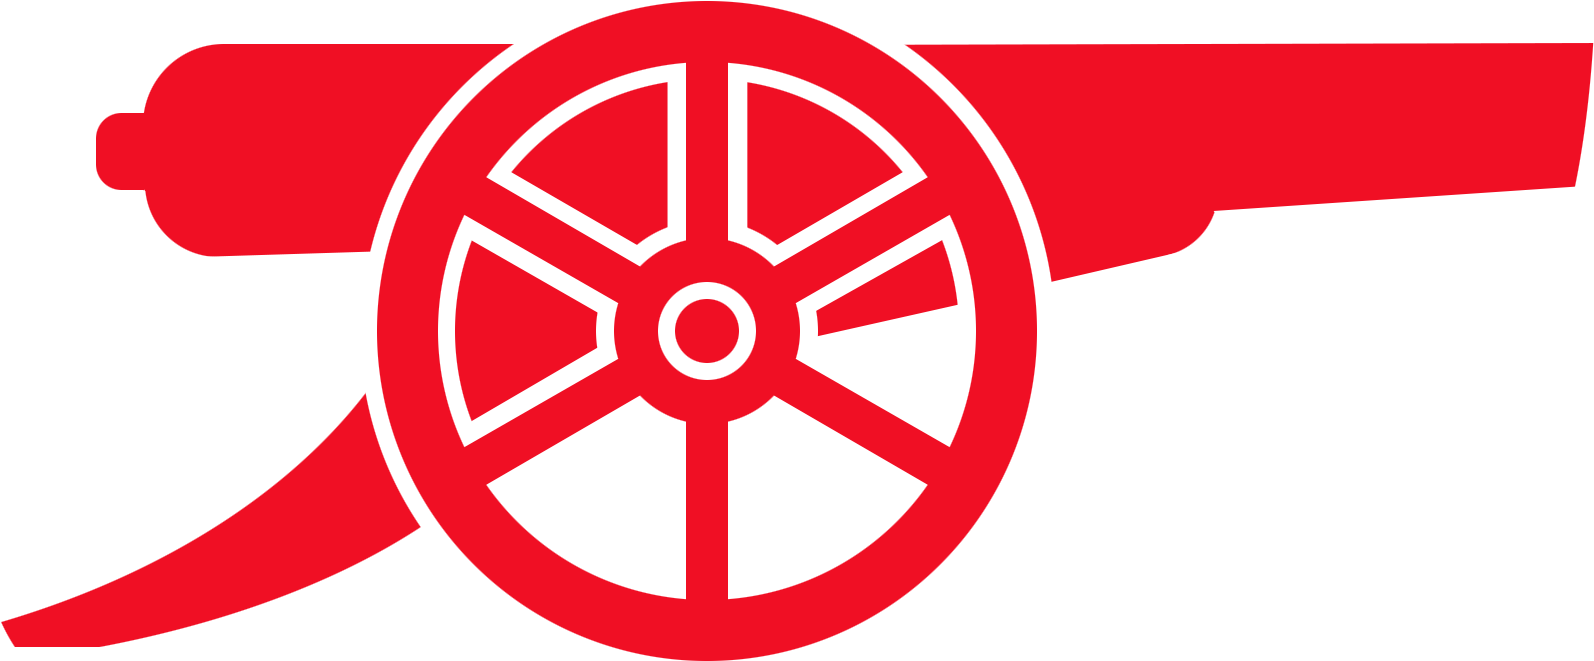 Arsenal Cannon Clipart - Arsenal Cannon Logo Png (1796x929)